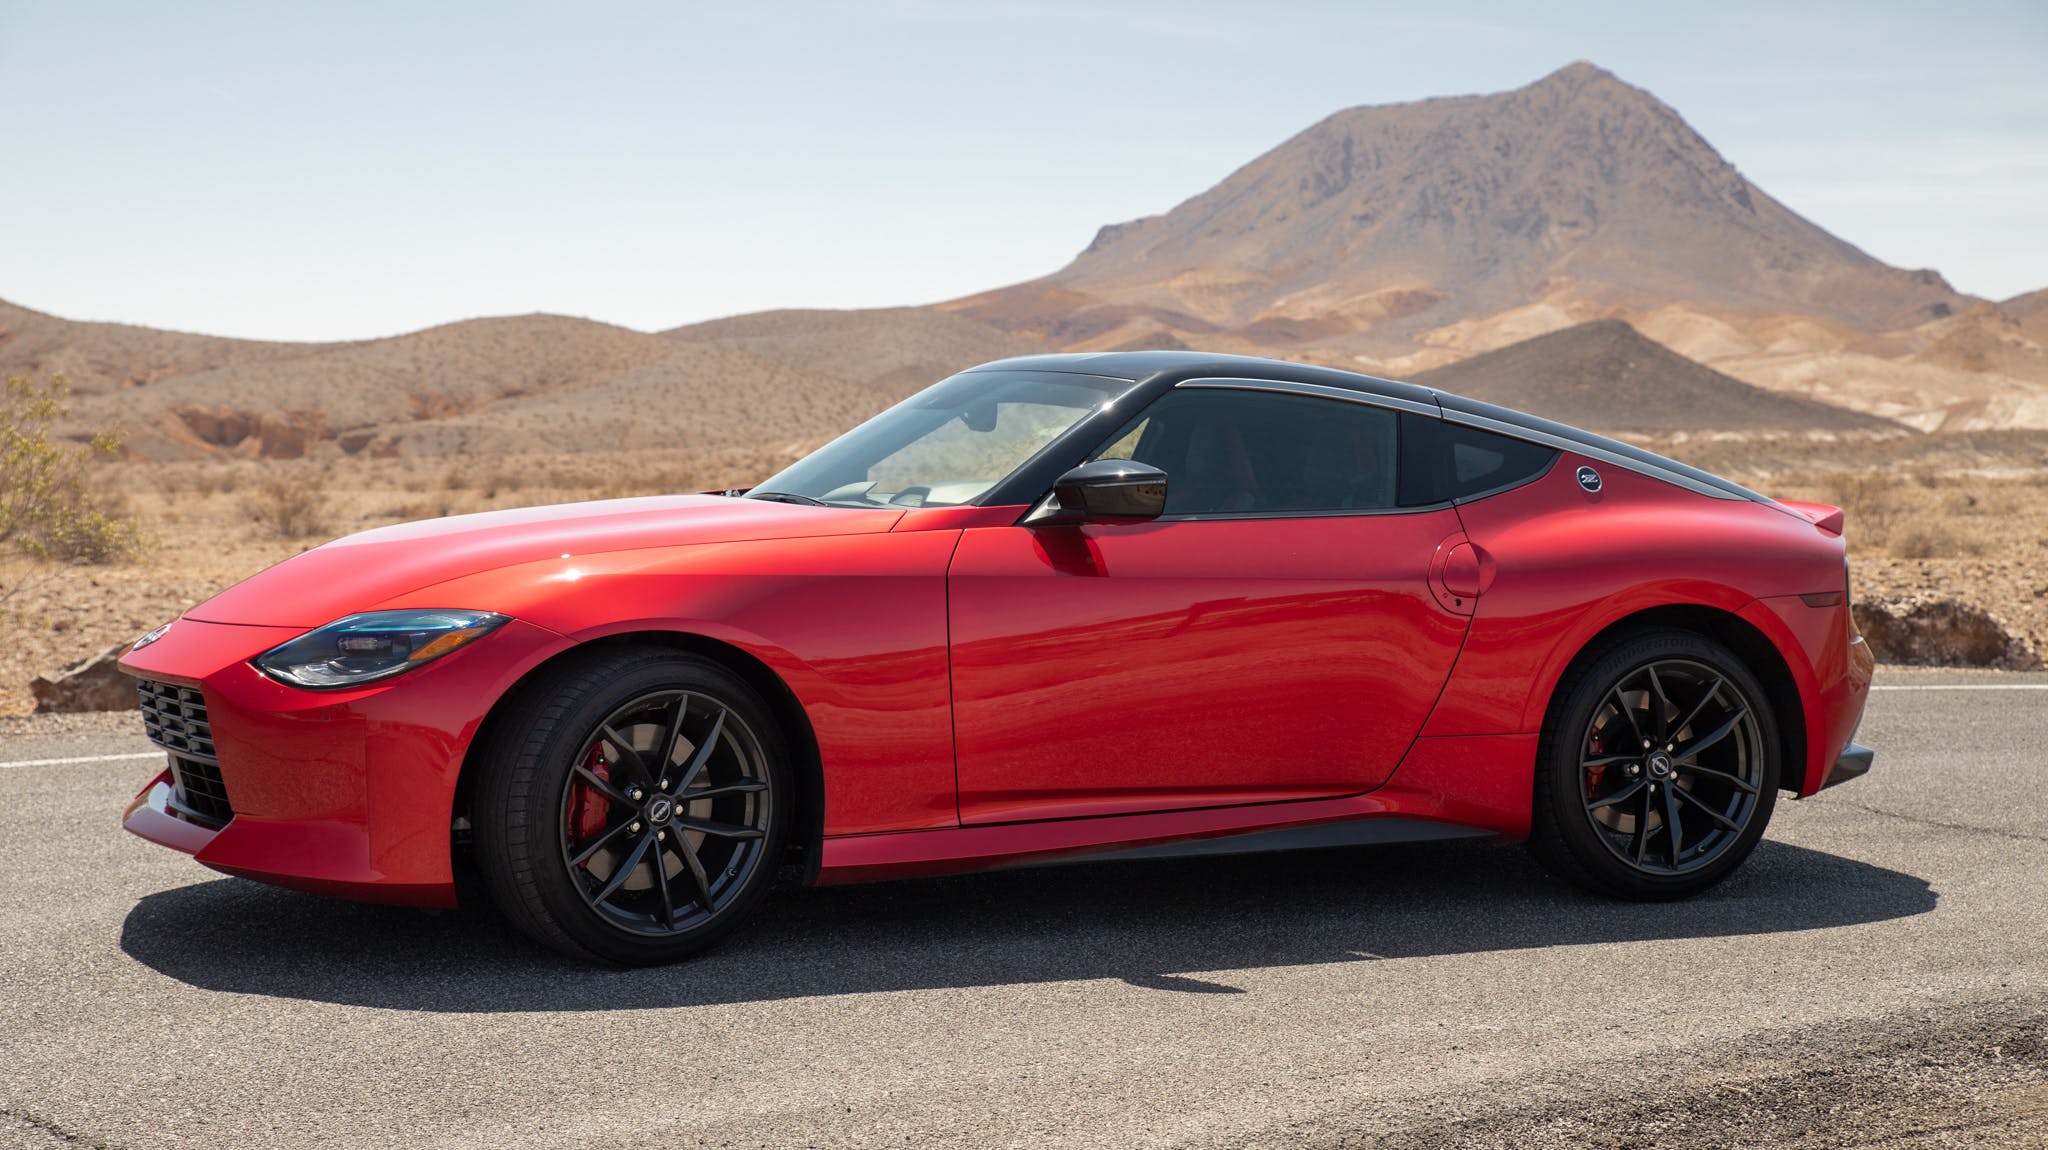 Nissan 370Z Vs Toyota 86: The Ultimate Battle of Performance Cars